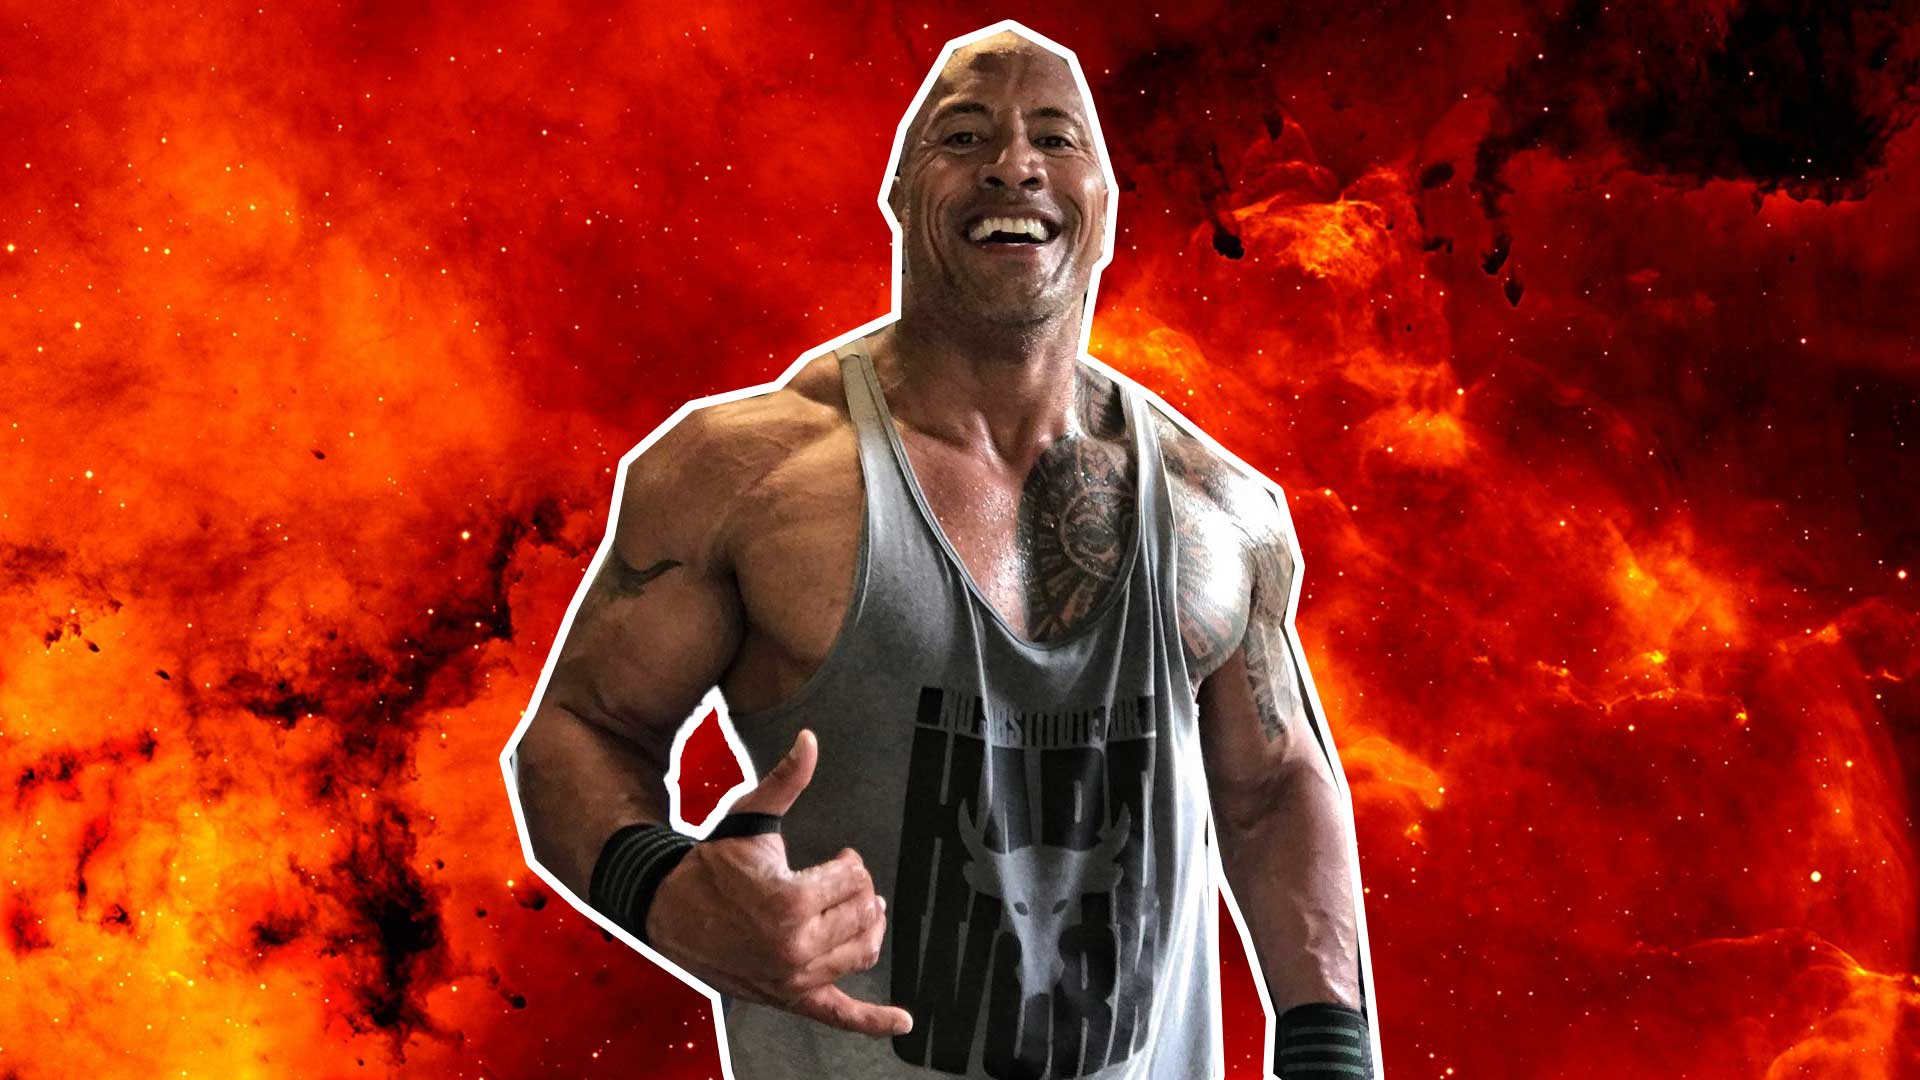 The Rock is pretty pleased but thinks you have it within you to do slightly better next time